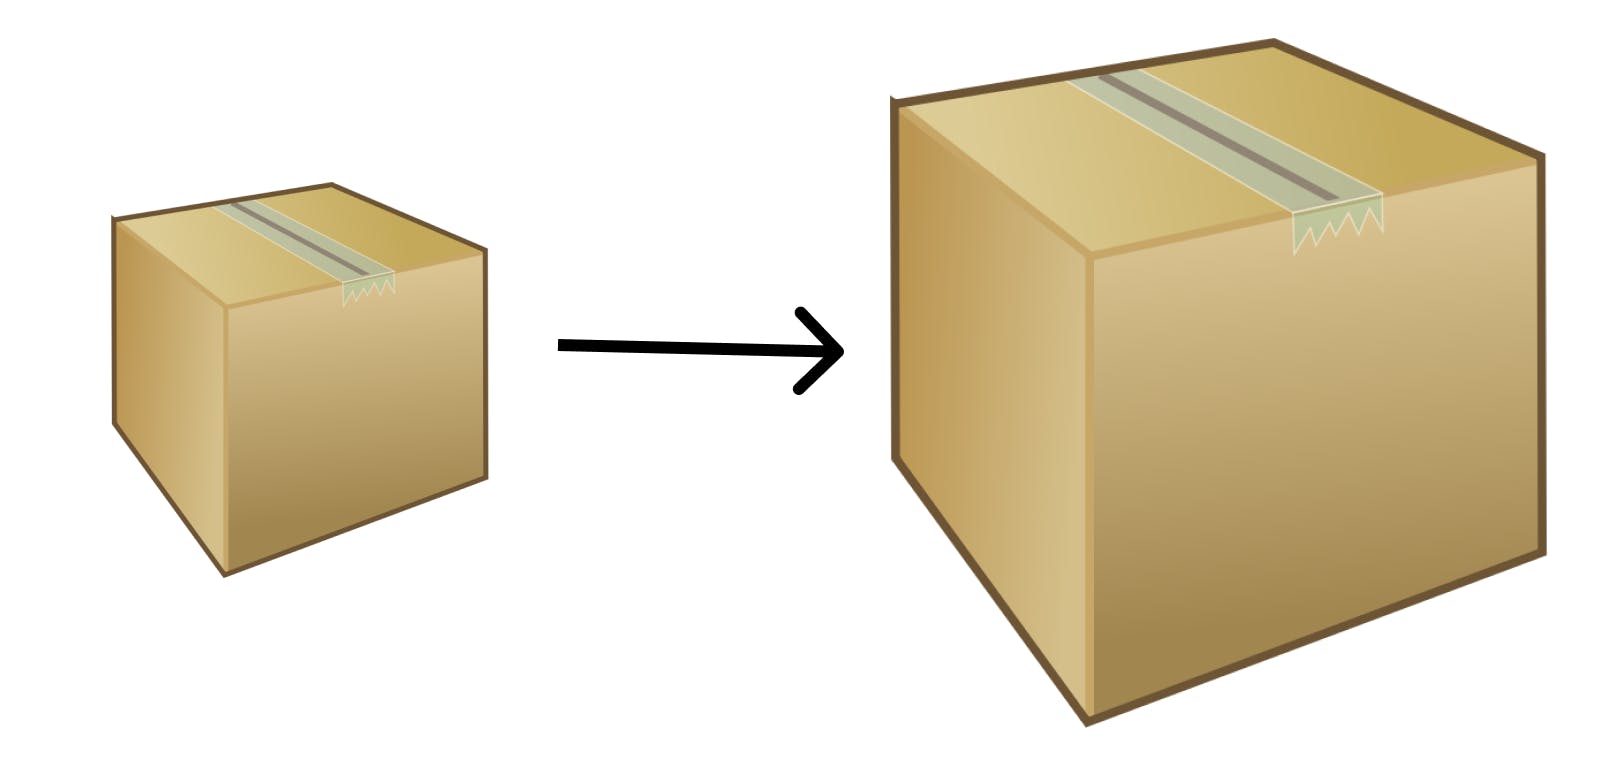 A smaller box with an arrow pointing to a bigger box